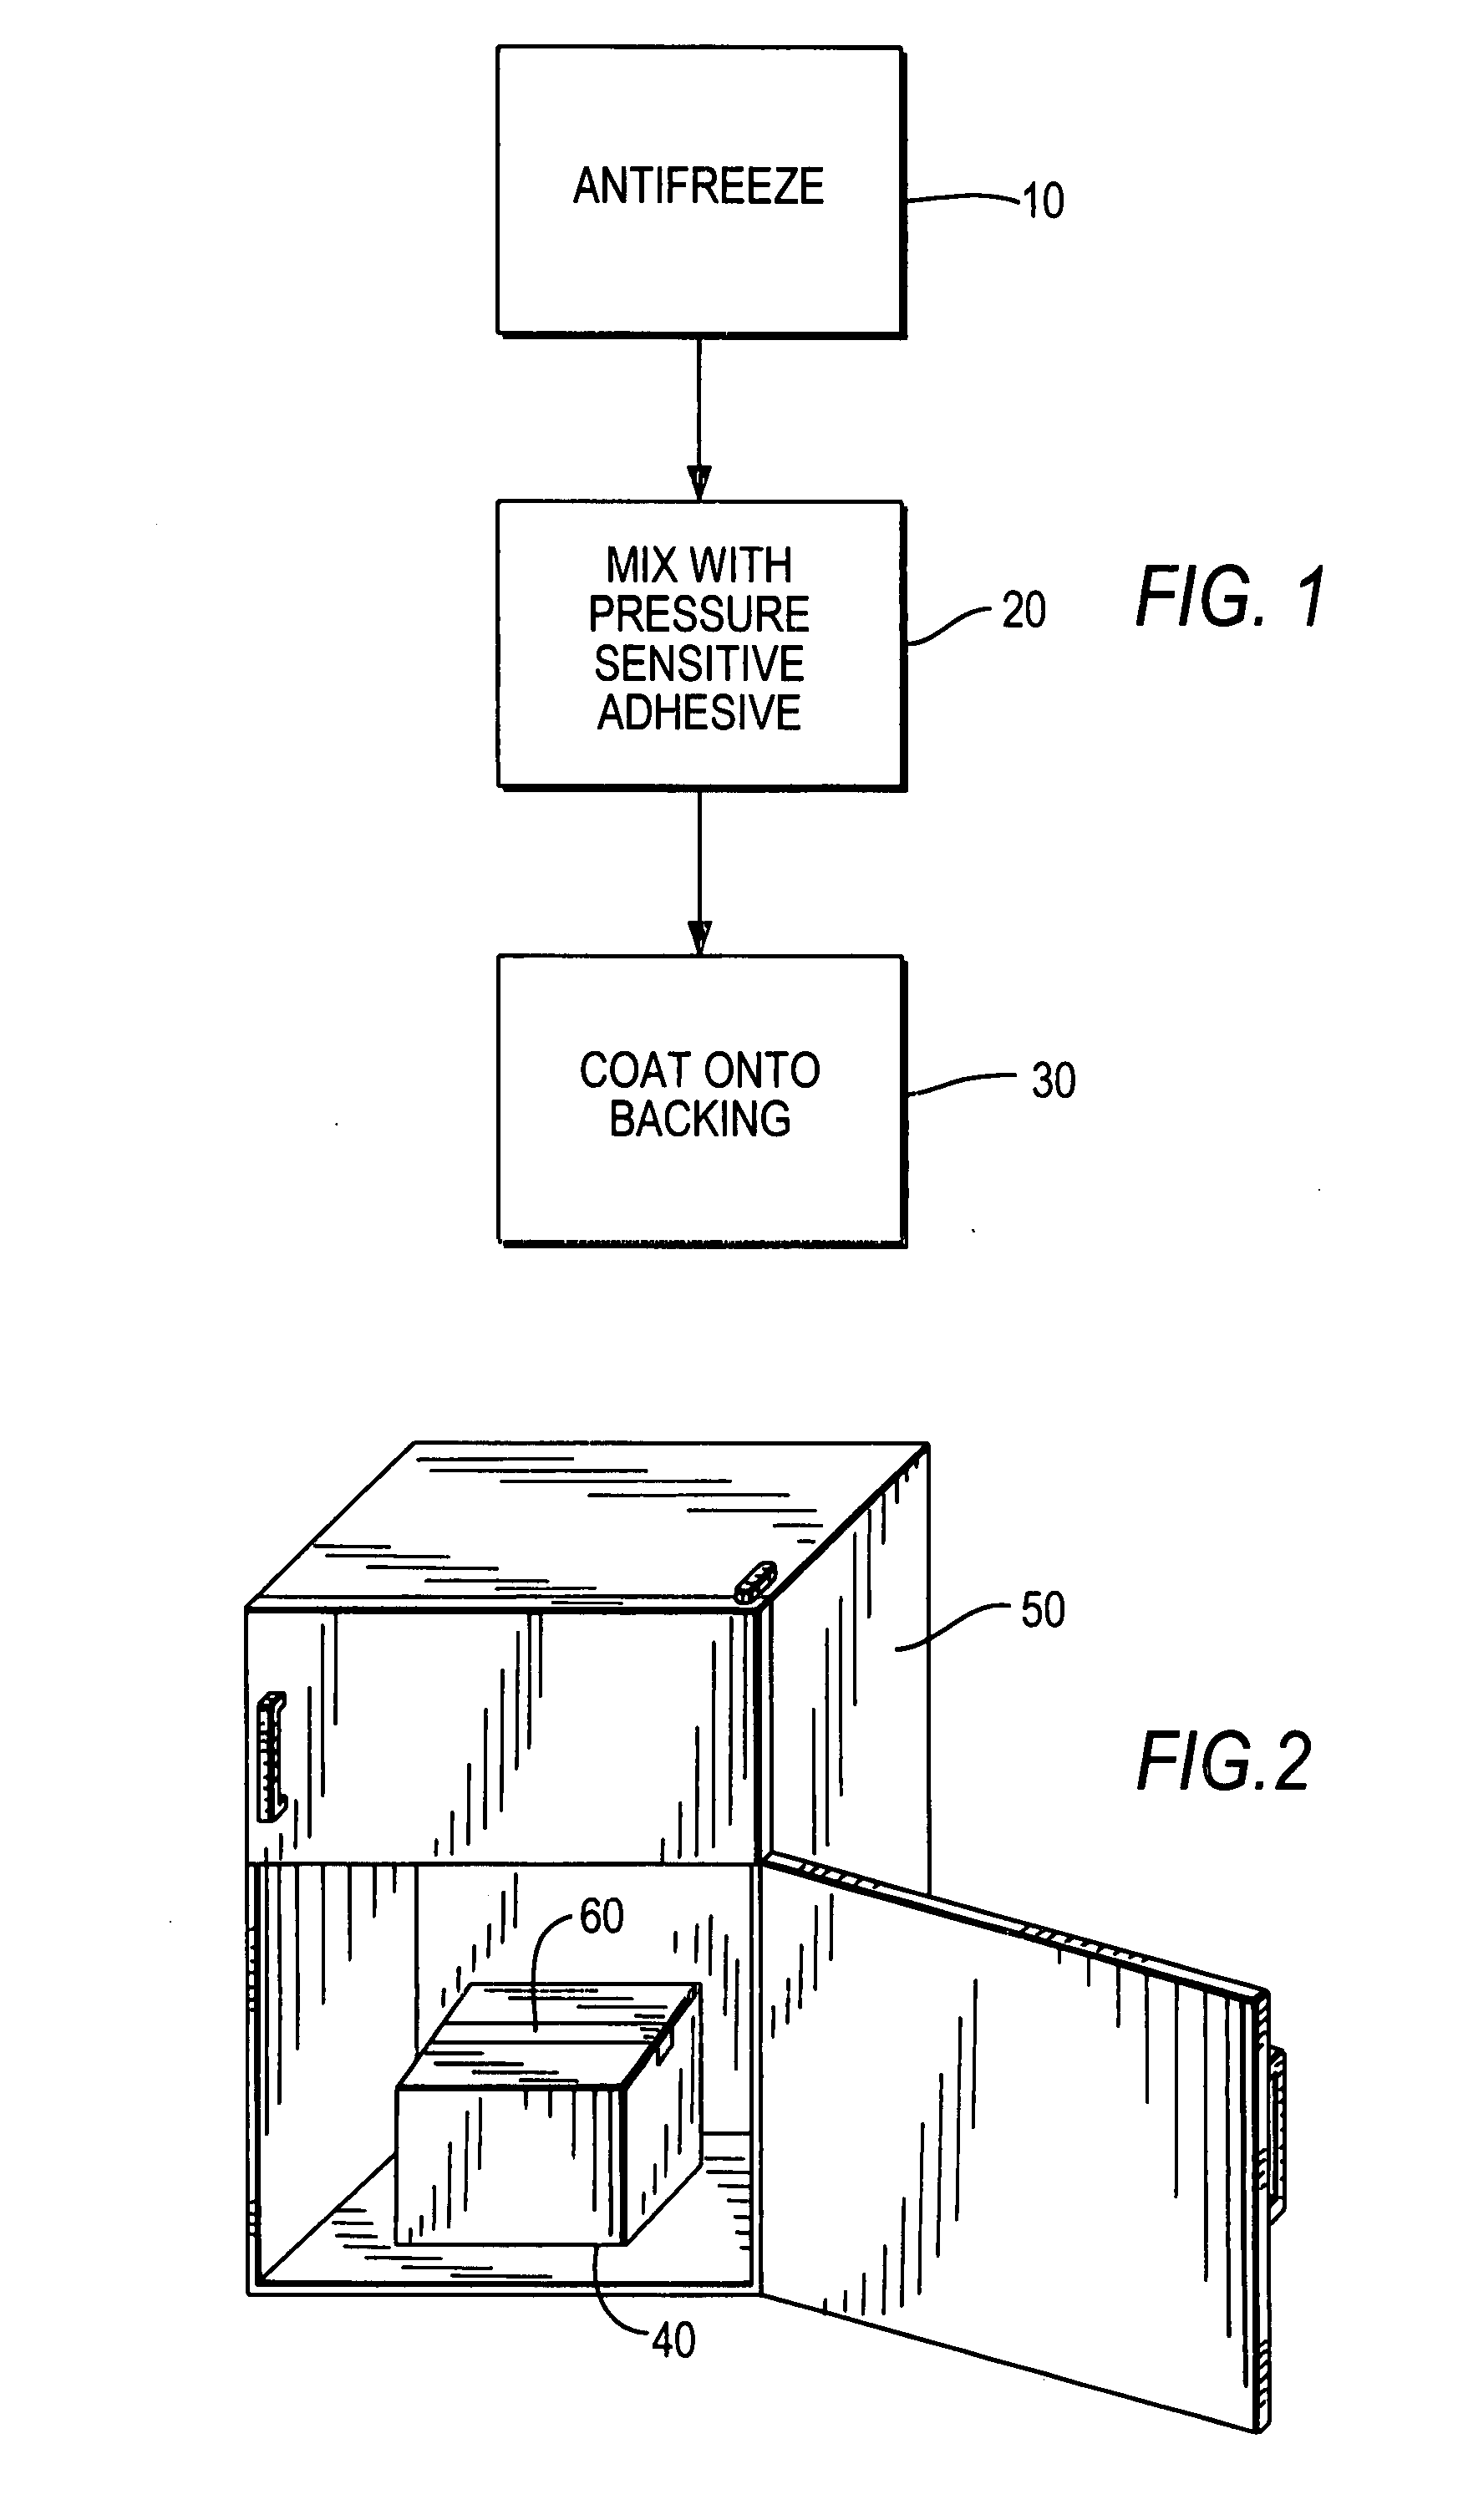 Antifreeze tape and method of making the same